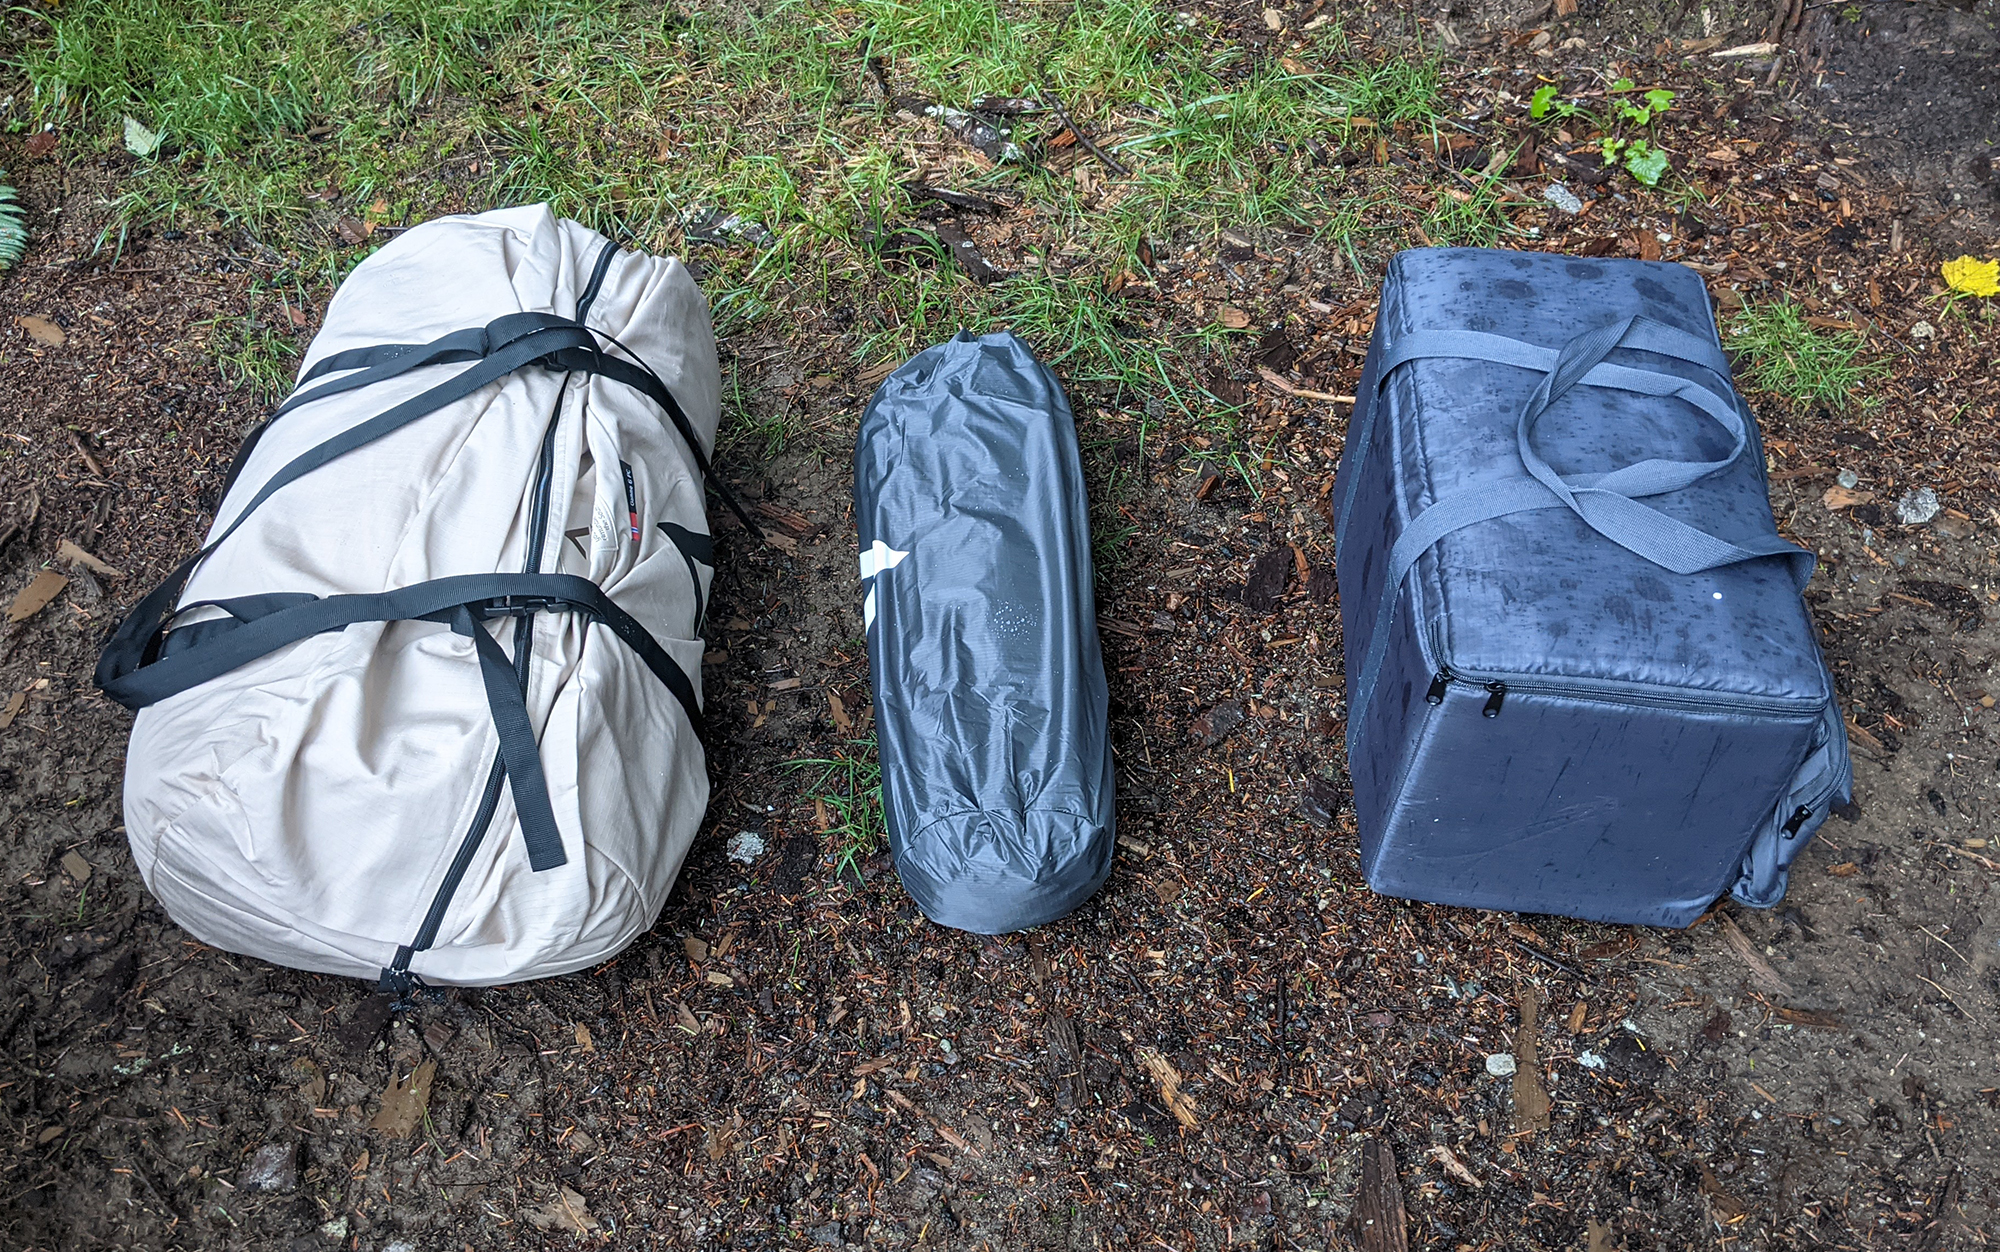 From left to right, the main tent, the inner tent, and the carrying case for the Nortent stove. 